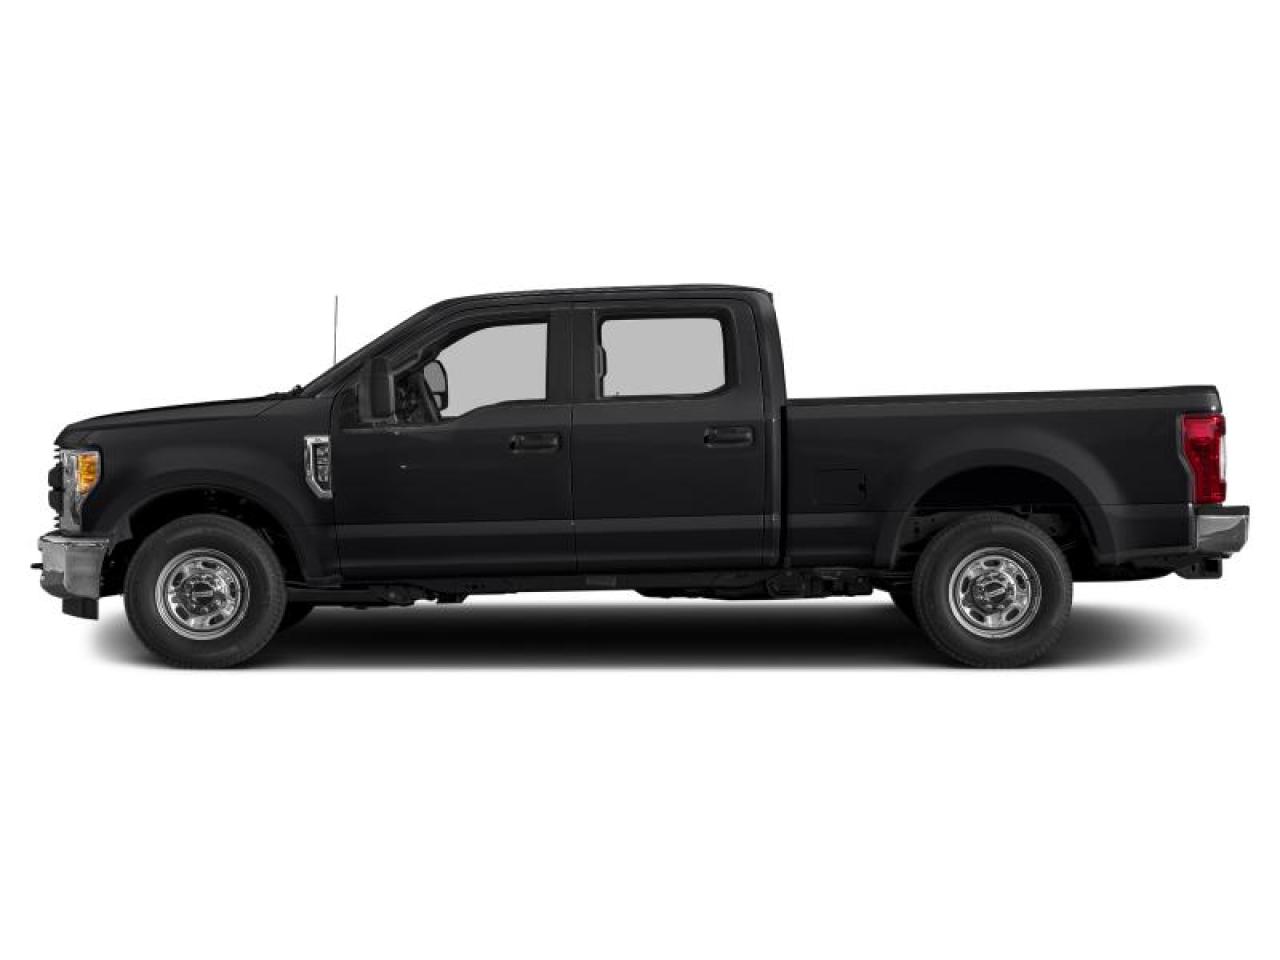 Used 2019 Ford F-350 Super Duty Lariat - Power Stroke for Sale in Paradise Hill, Saskatchewan